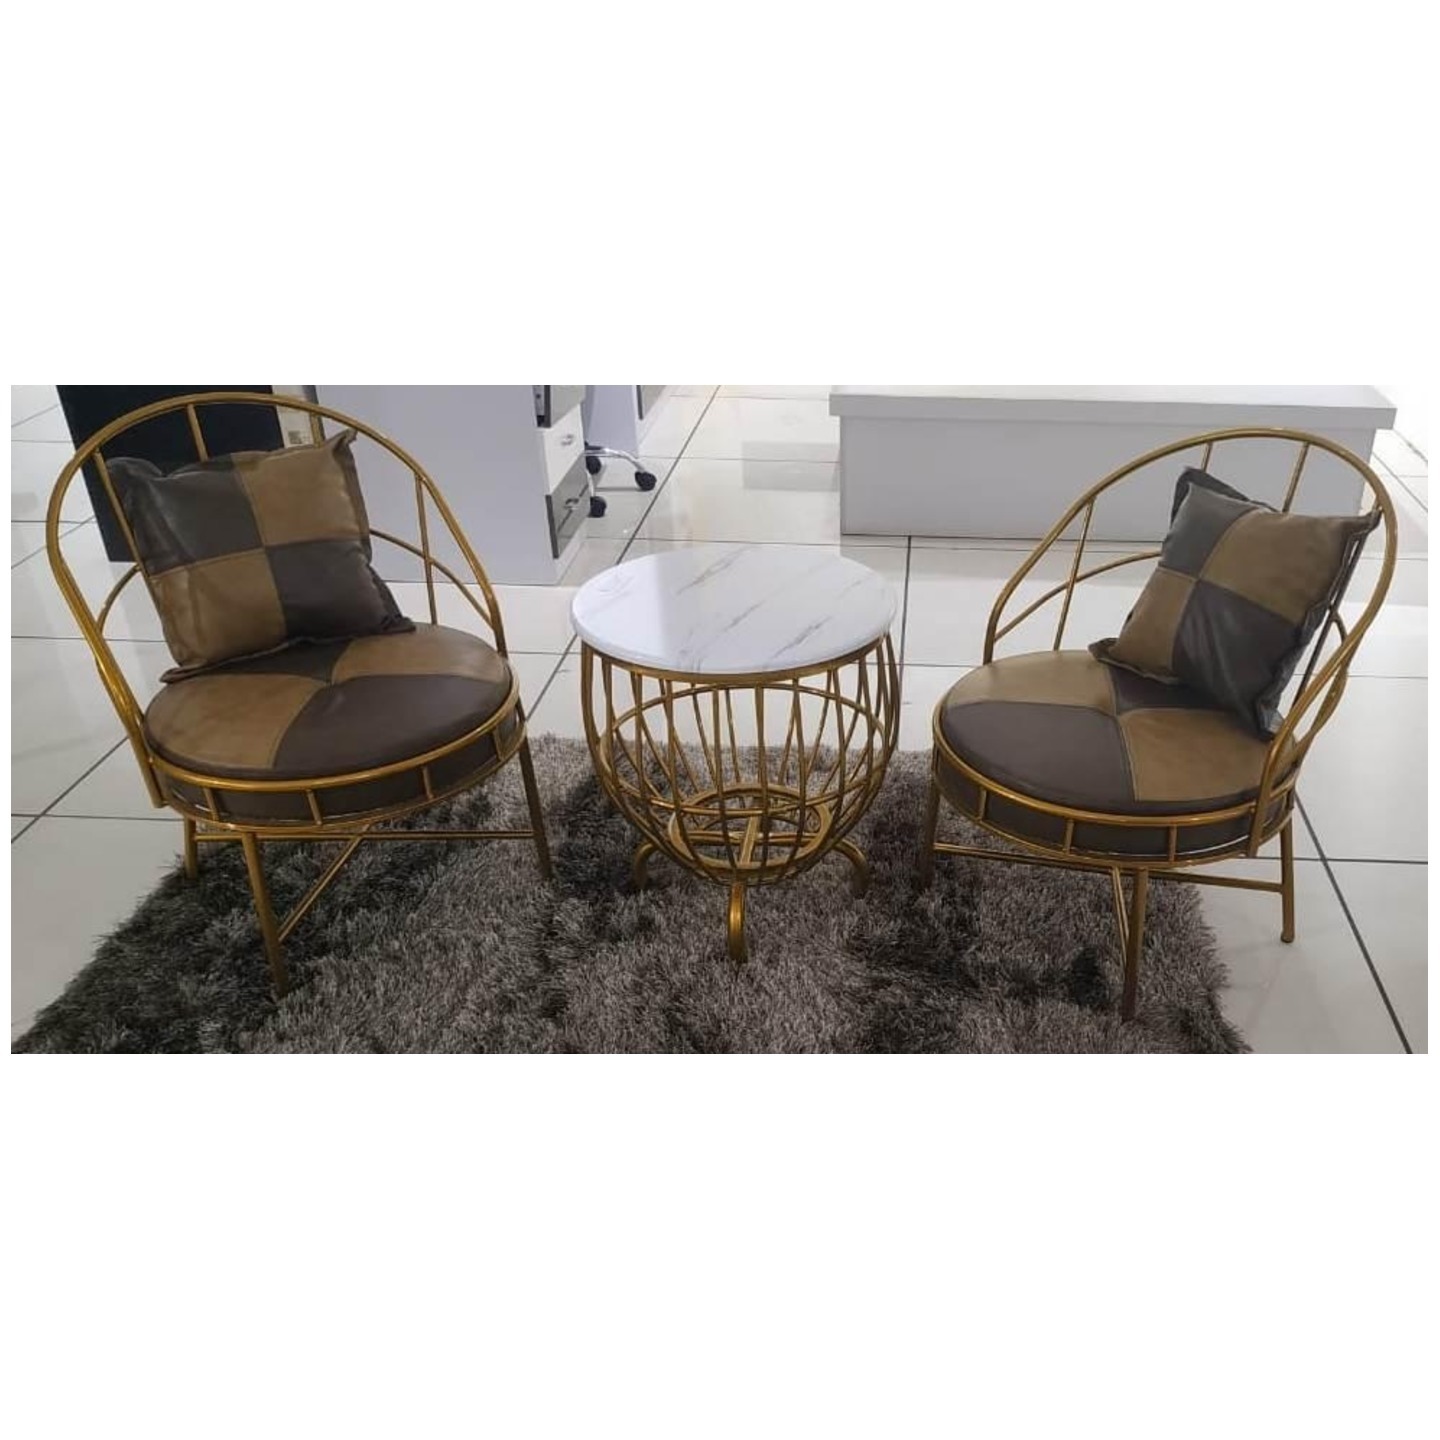 IHM Outdoor Dining Table 633804 Two Seater in Gold Colour